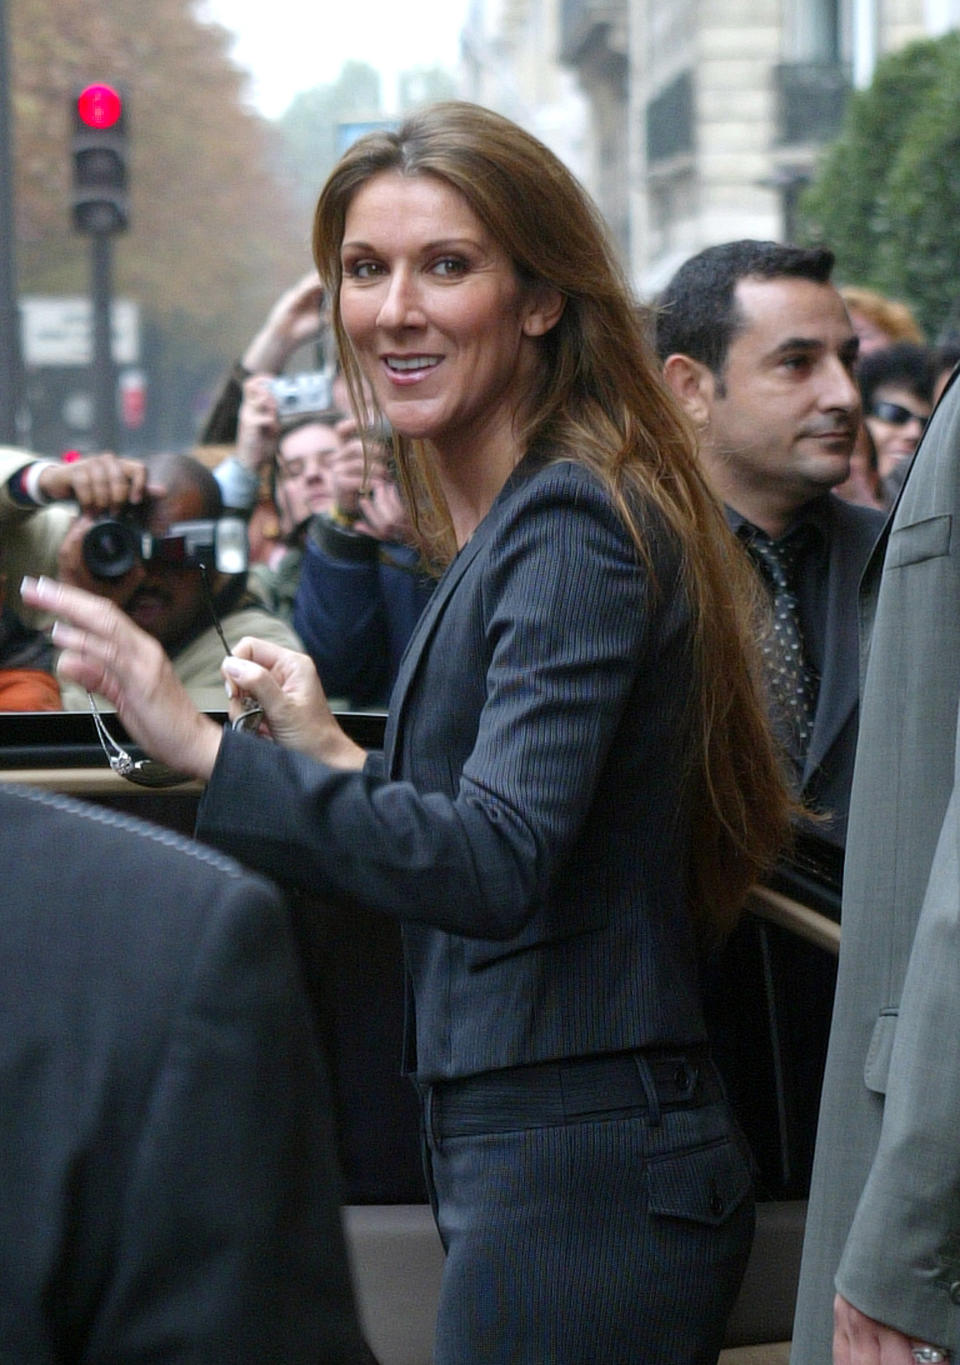 Celine Dion during Celine Dion On Tour in Paris to Promote Her New CD 'On ne change pas' - October 7, 2005 at Four Seasons Hotel Georges in Paris, France. (Photo by Mehdi Taamallah/FilmMagic)